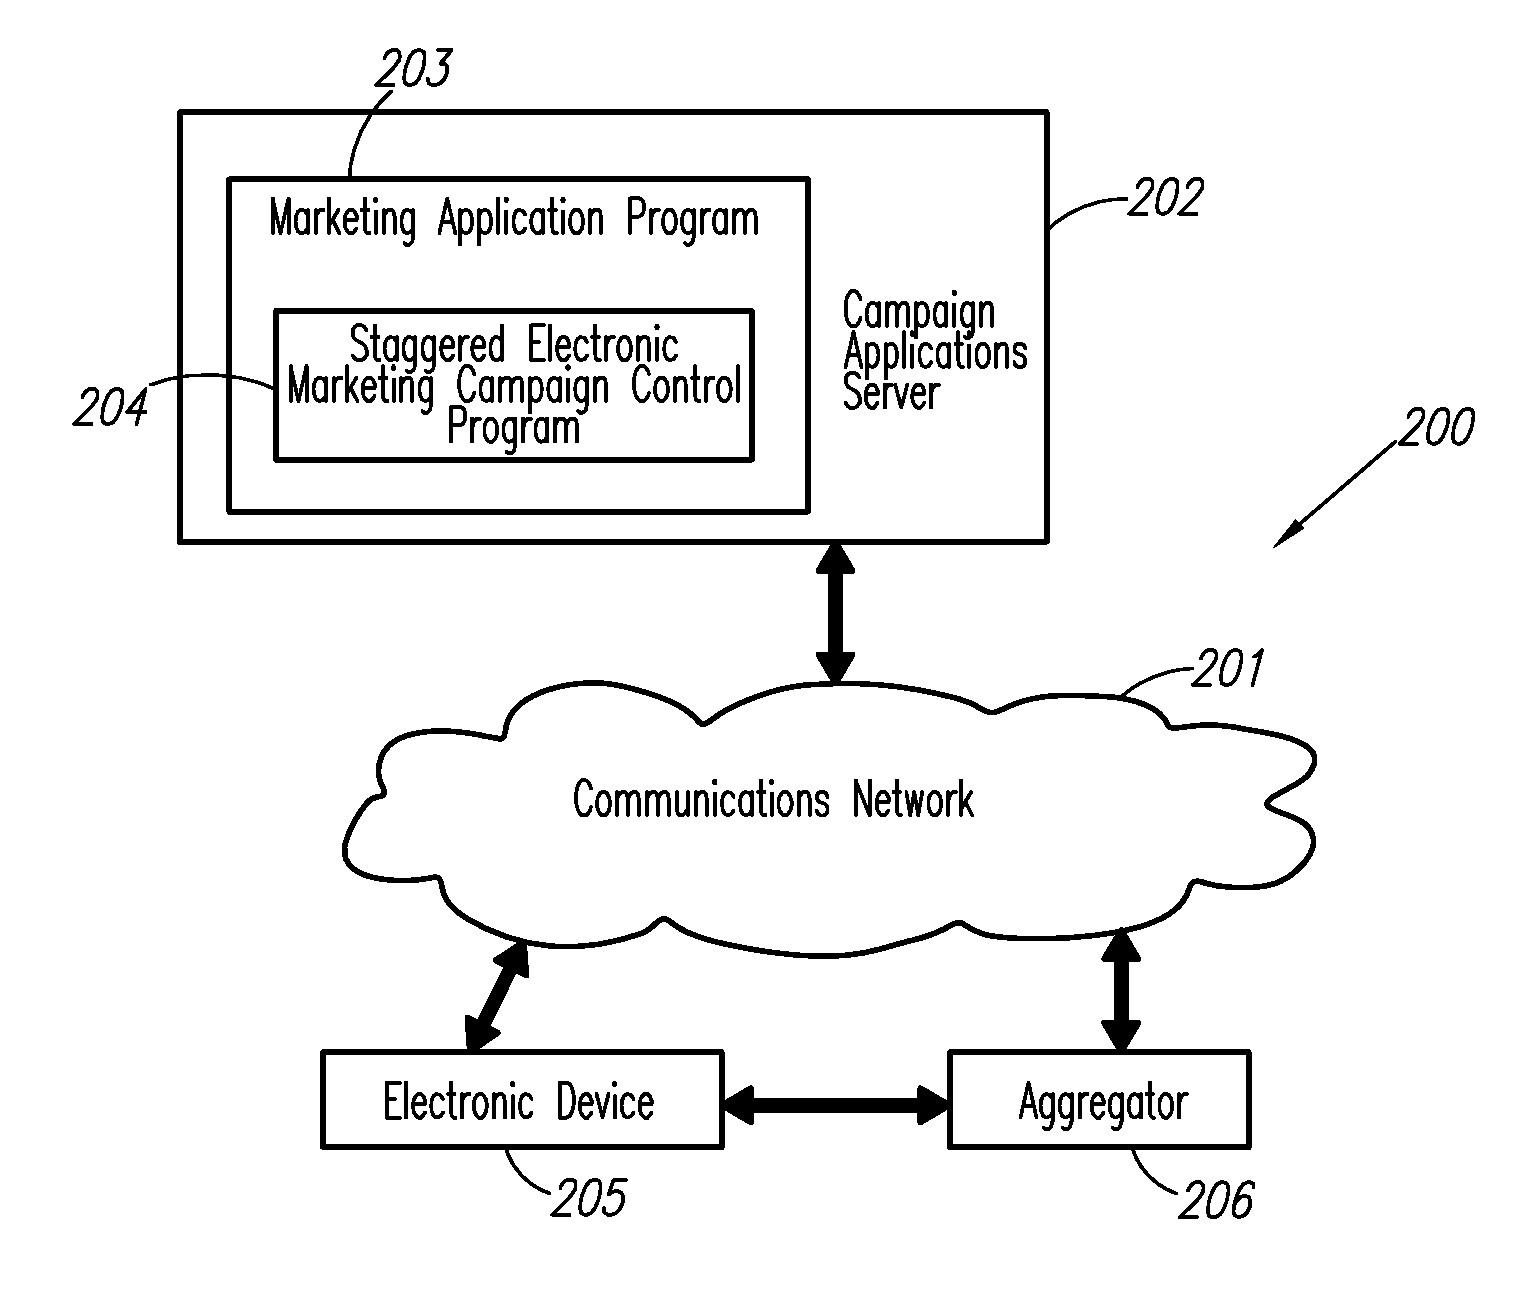 Method And System For Computer-Based Network Advertising